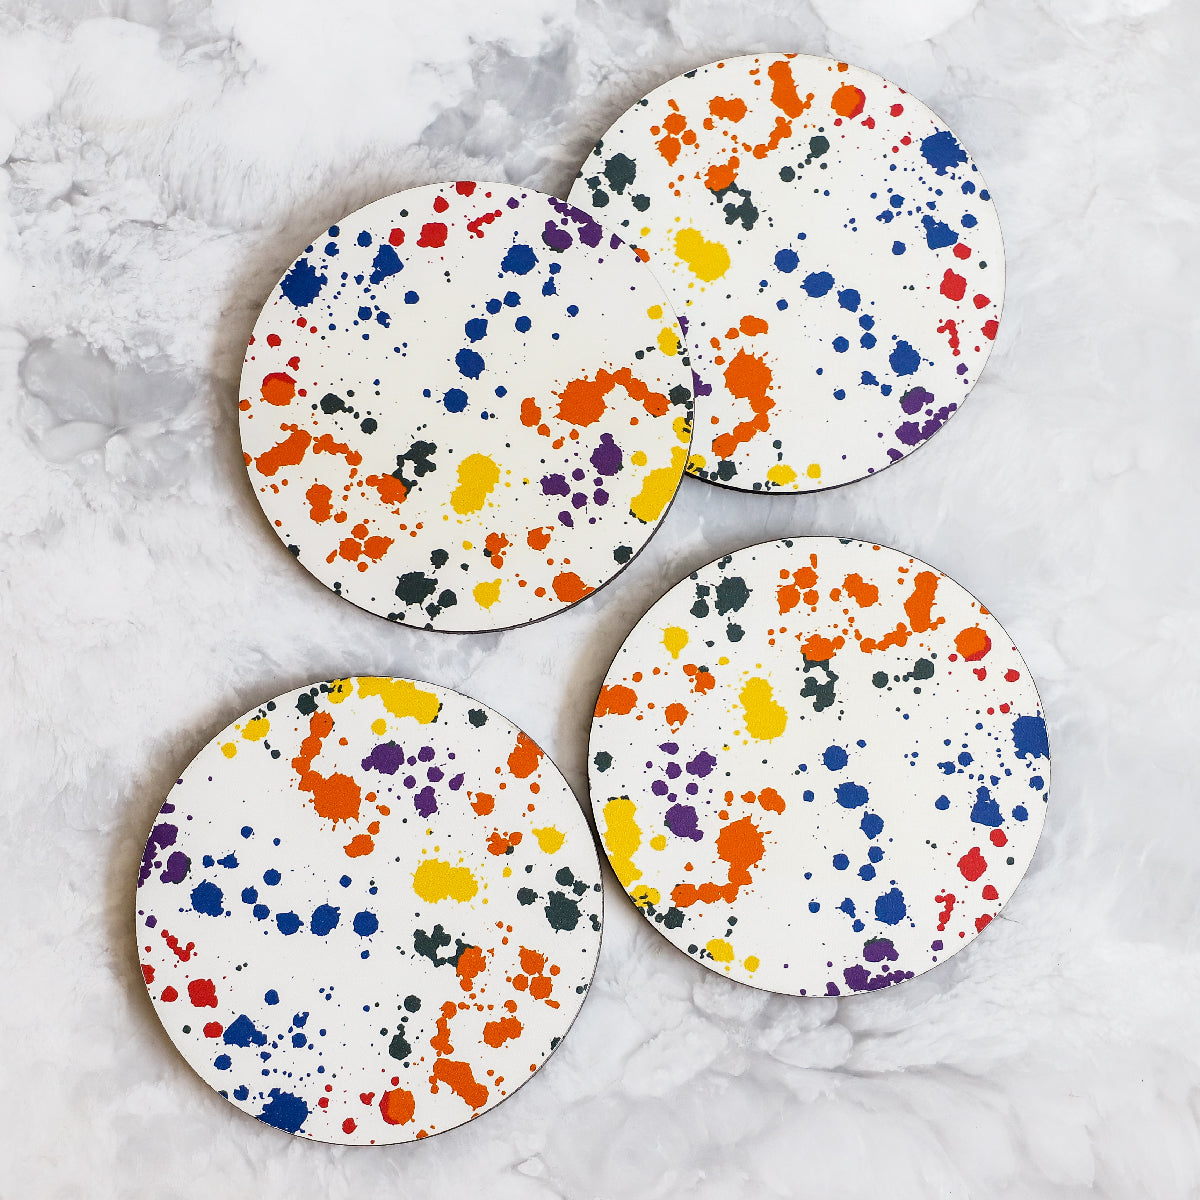 Printed Coasters with Splatter pattern in yellow, orange, blue and green made of cork and wood by Tisch New York